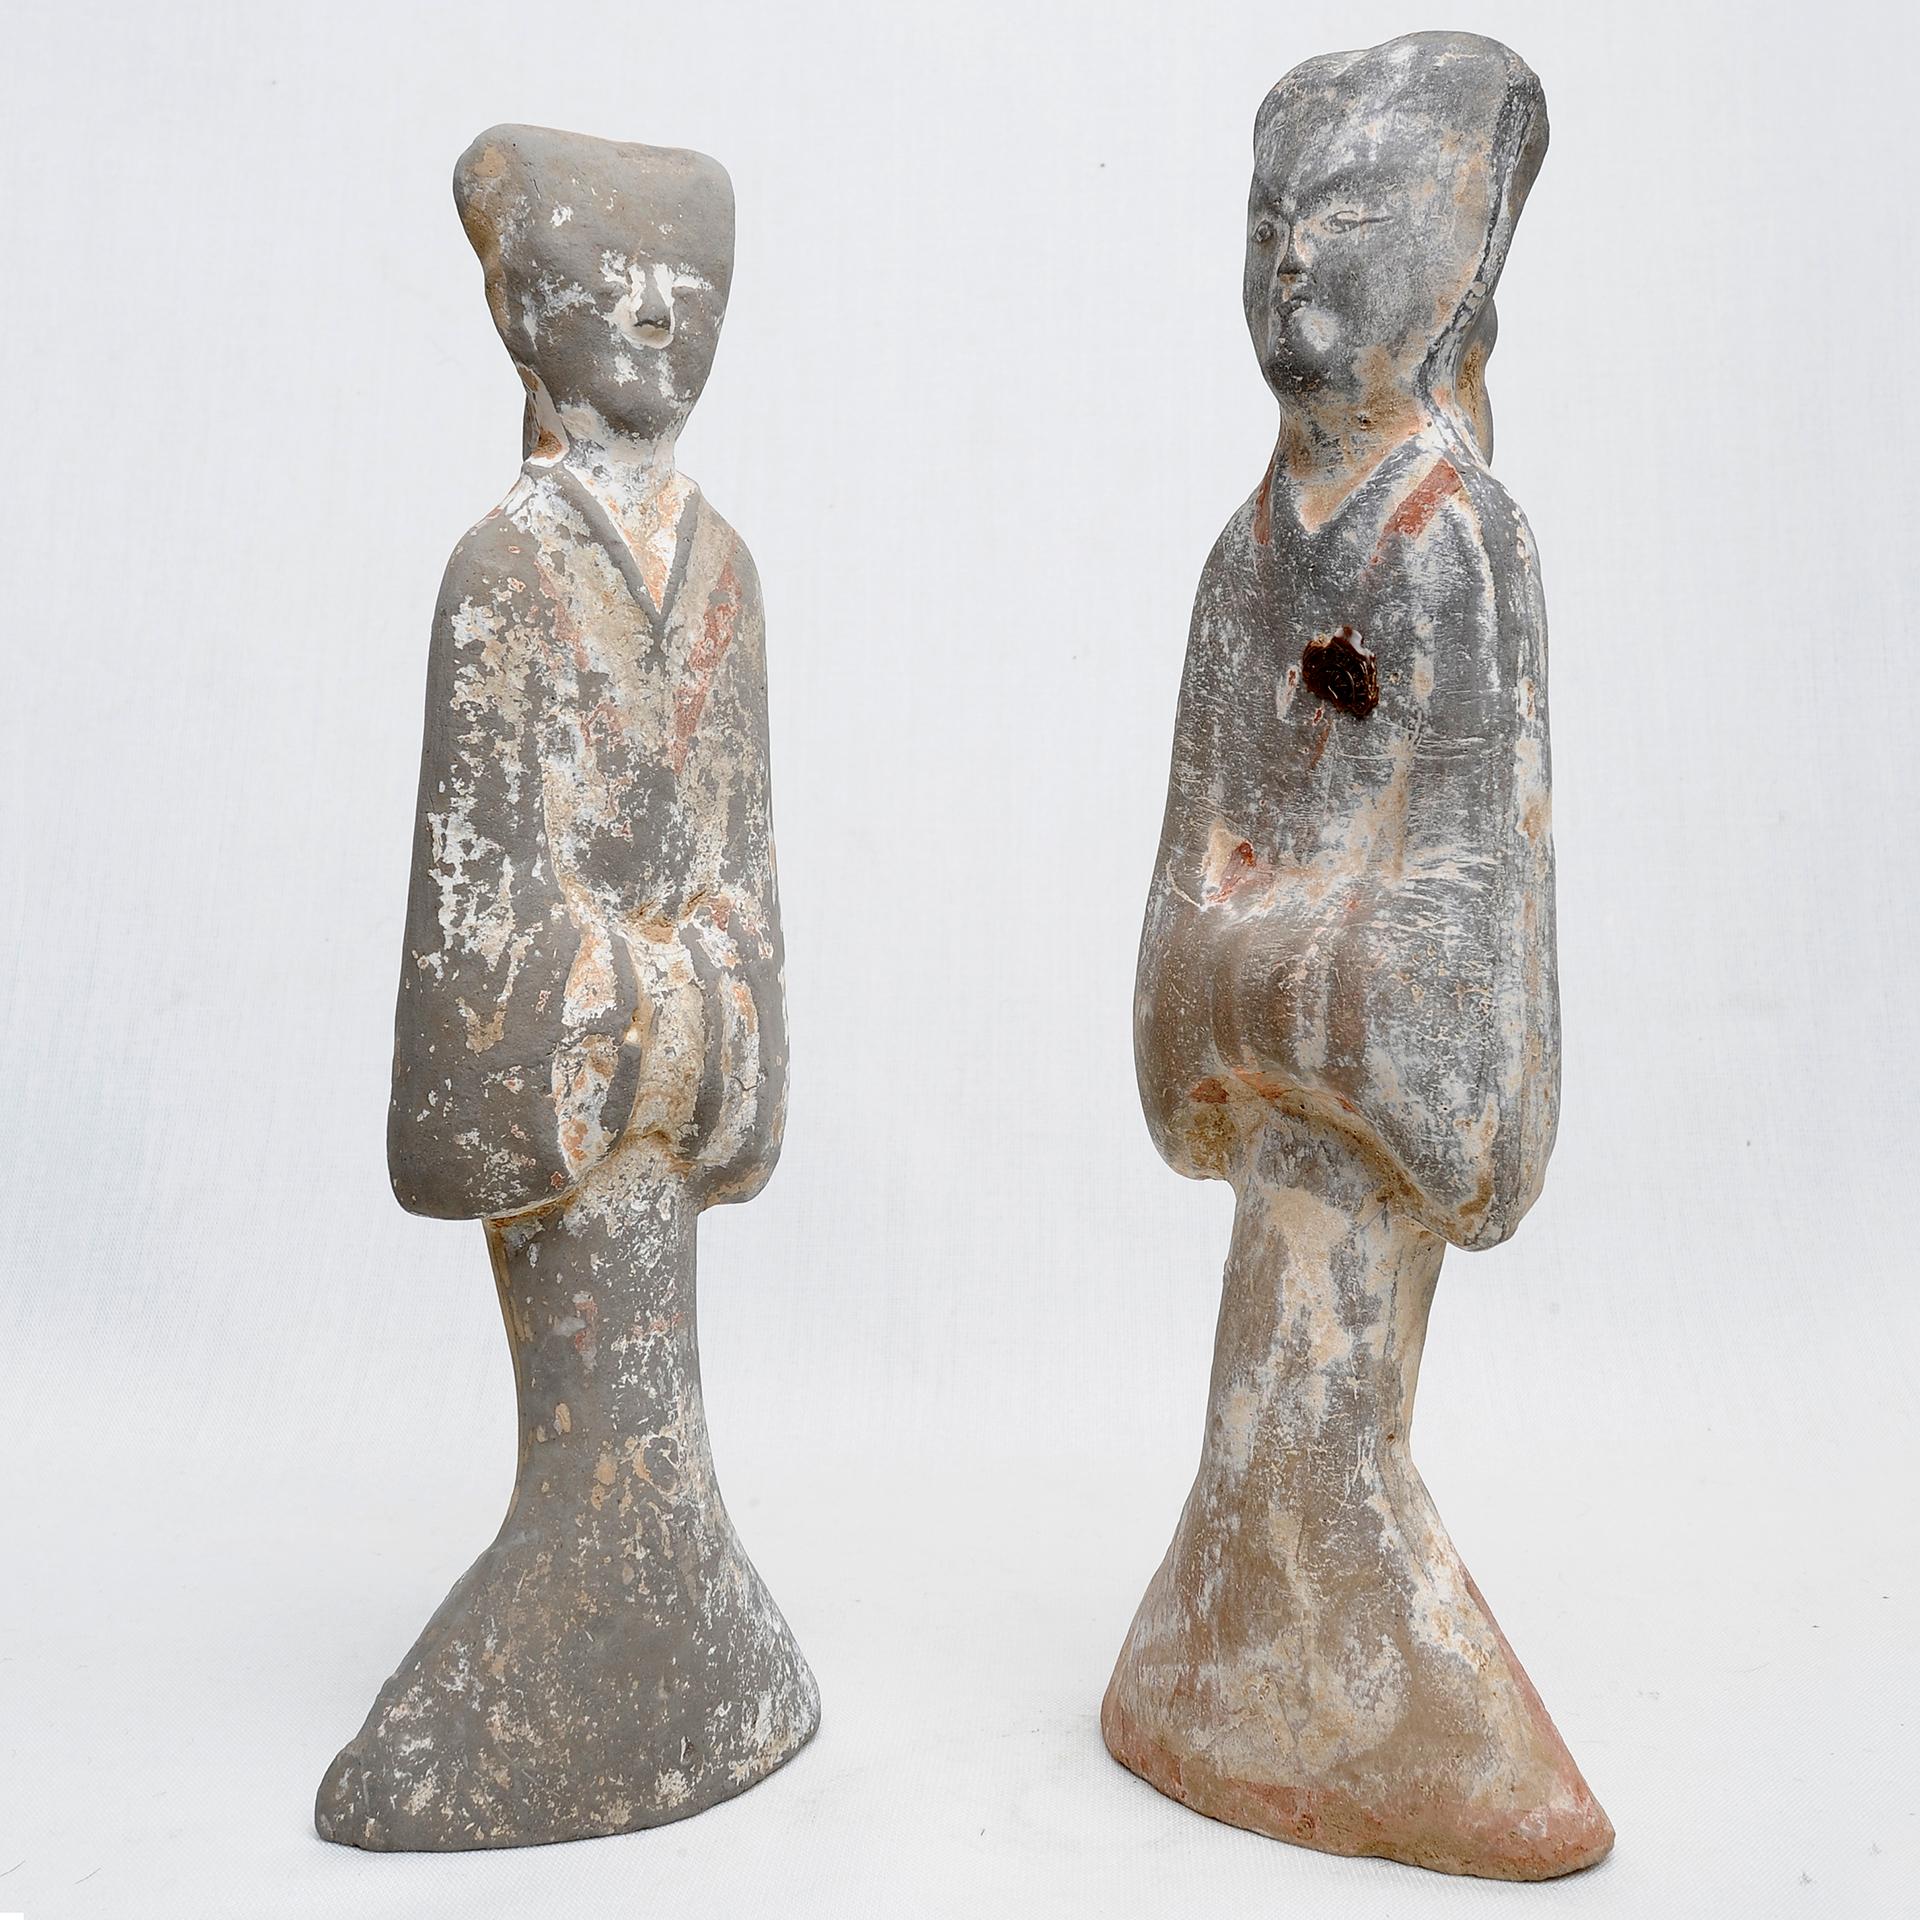 Hand-Carved Antique Terracotta Chinese Figures Statues For Sale